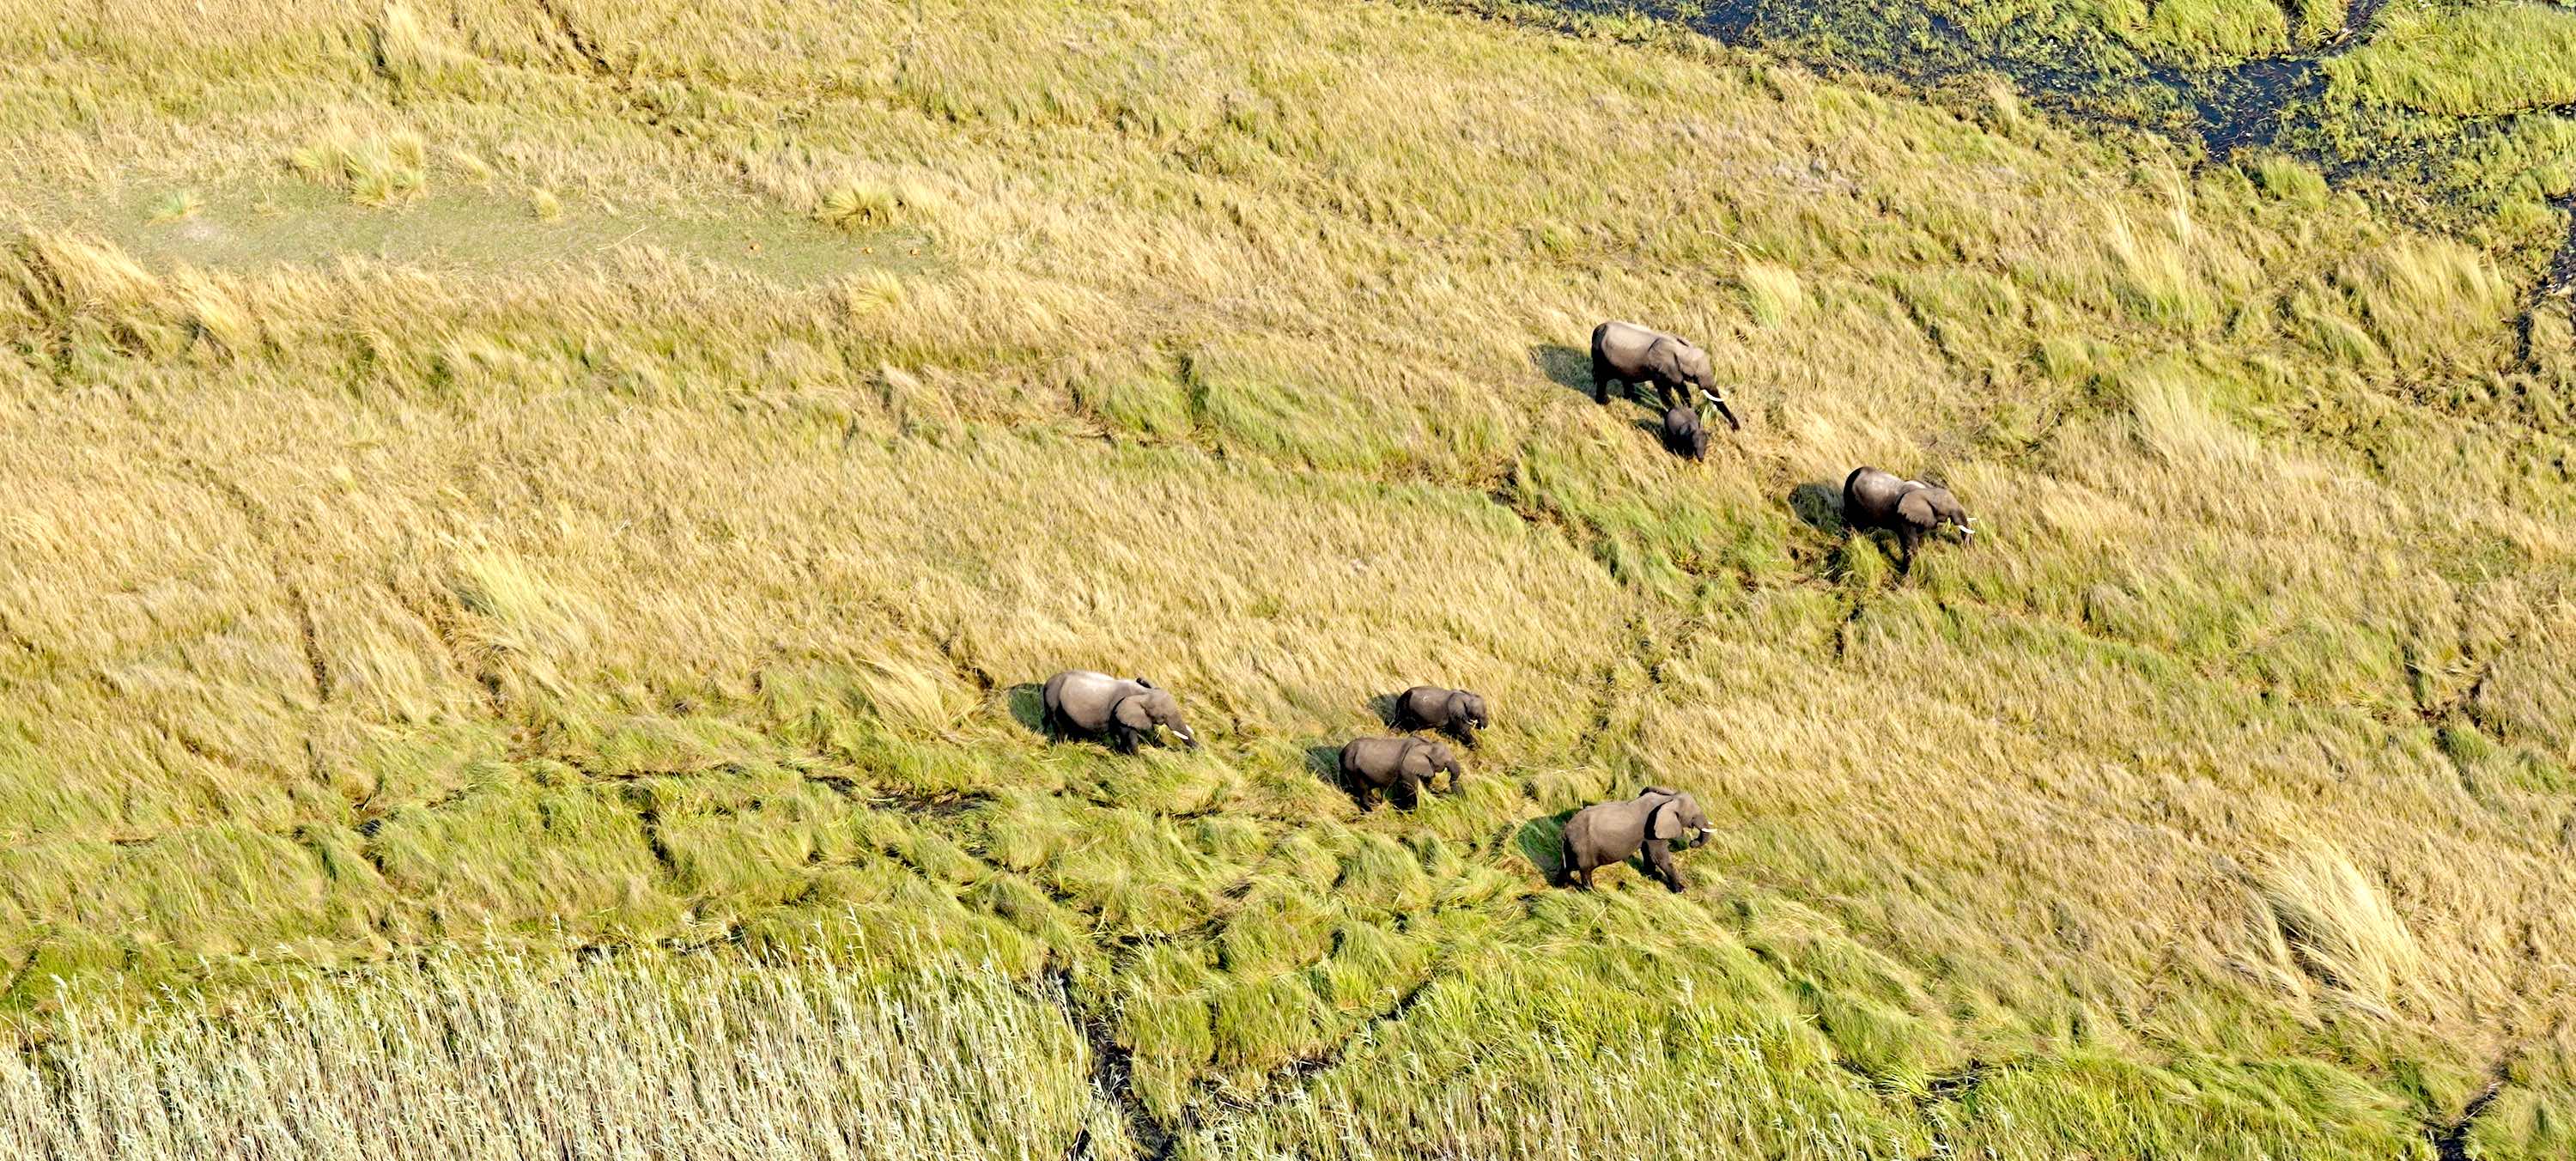 A group of seven elephants is clearly visible from the air.